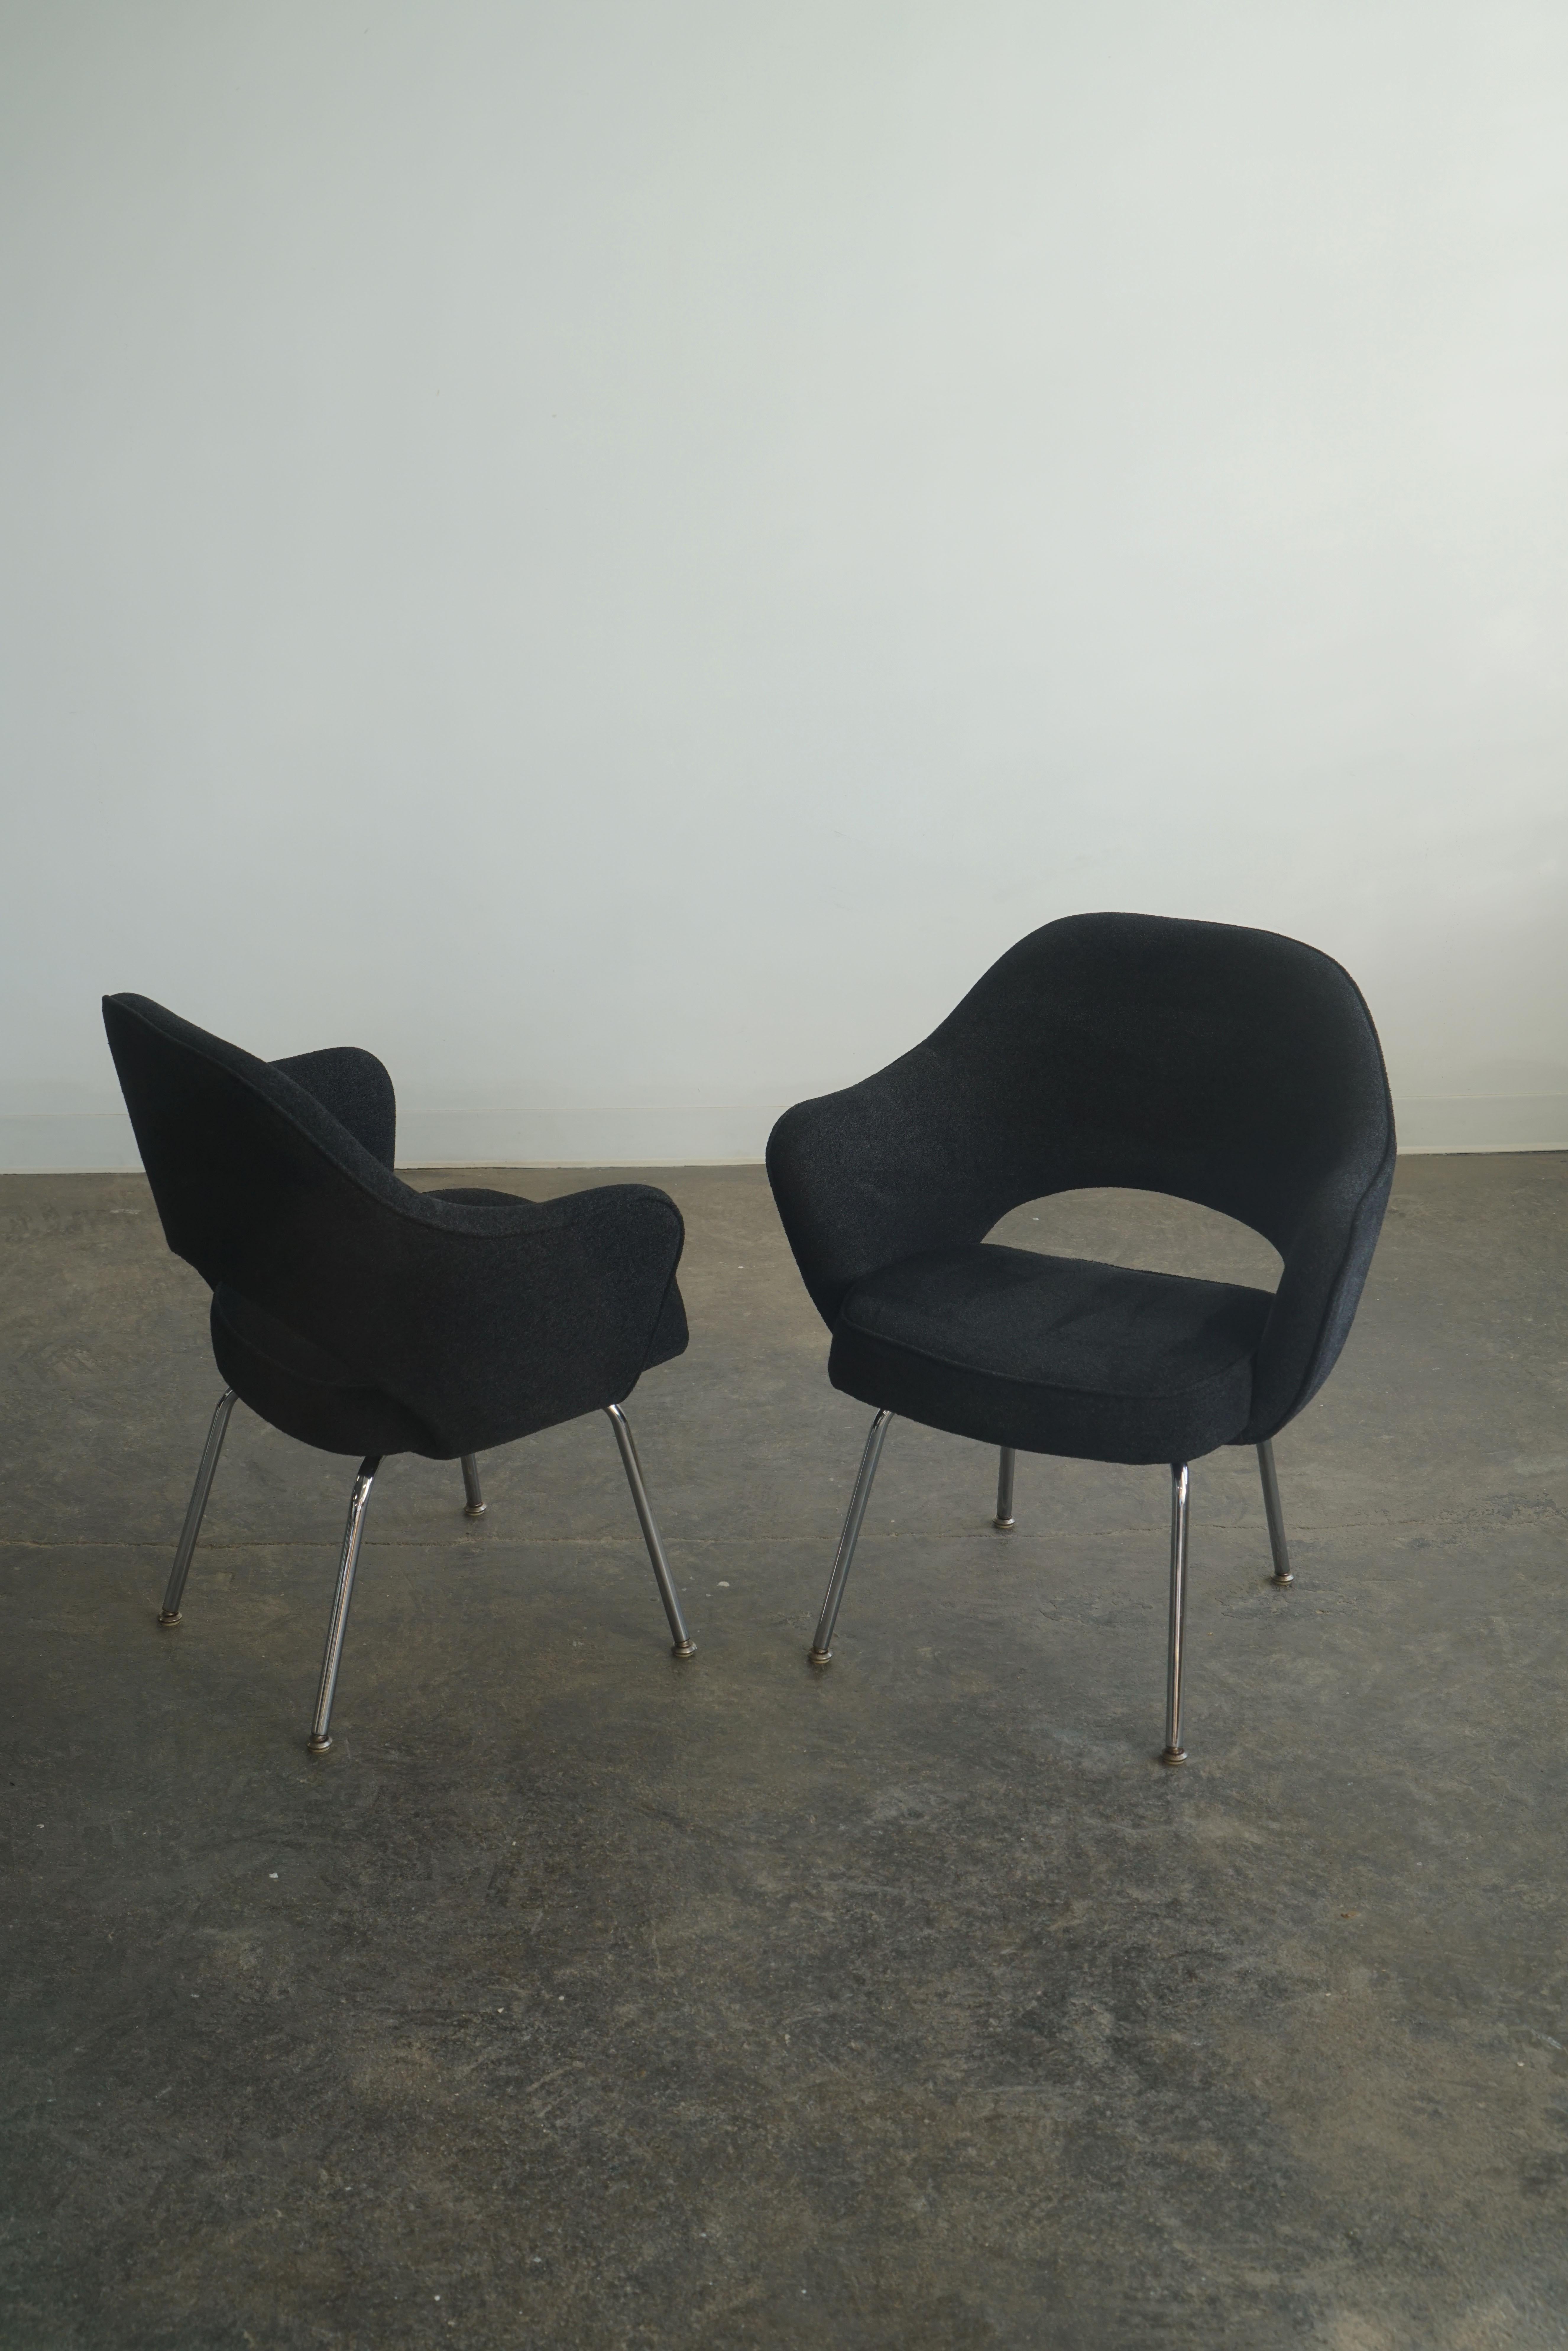 This for a pair of Saarinen Executive Chairs, armchair version.
Knoll, Circa 1985.
Black upholstery, chrome legs.

Priced as a pair of 2. 

Originally designed in 1946, these have been one of Knoll's most popular designs.

Condition:
Overall very